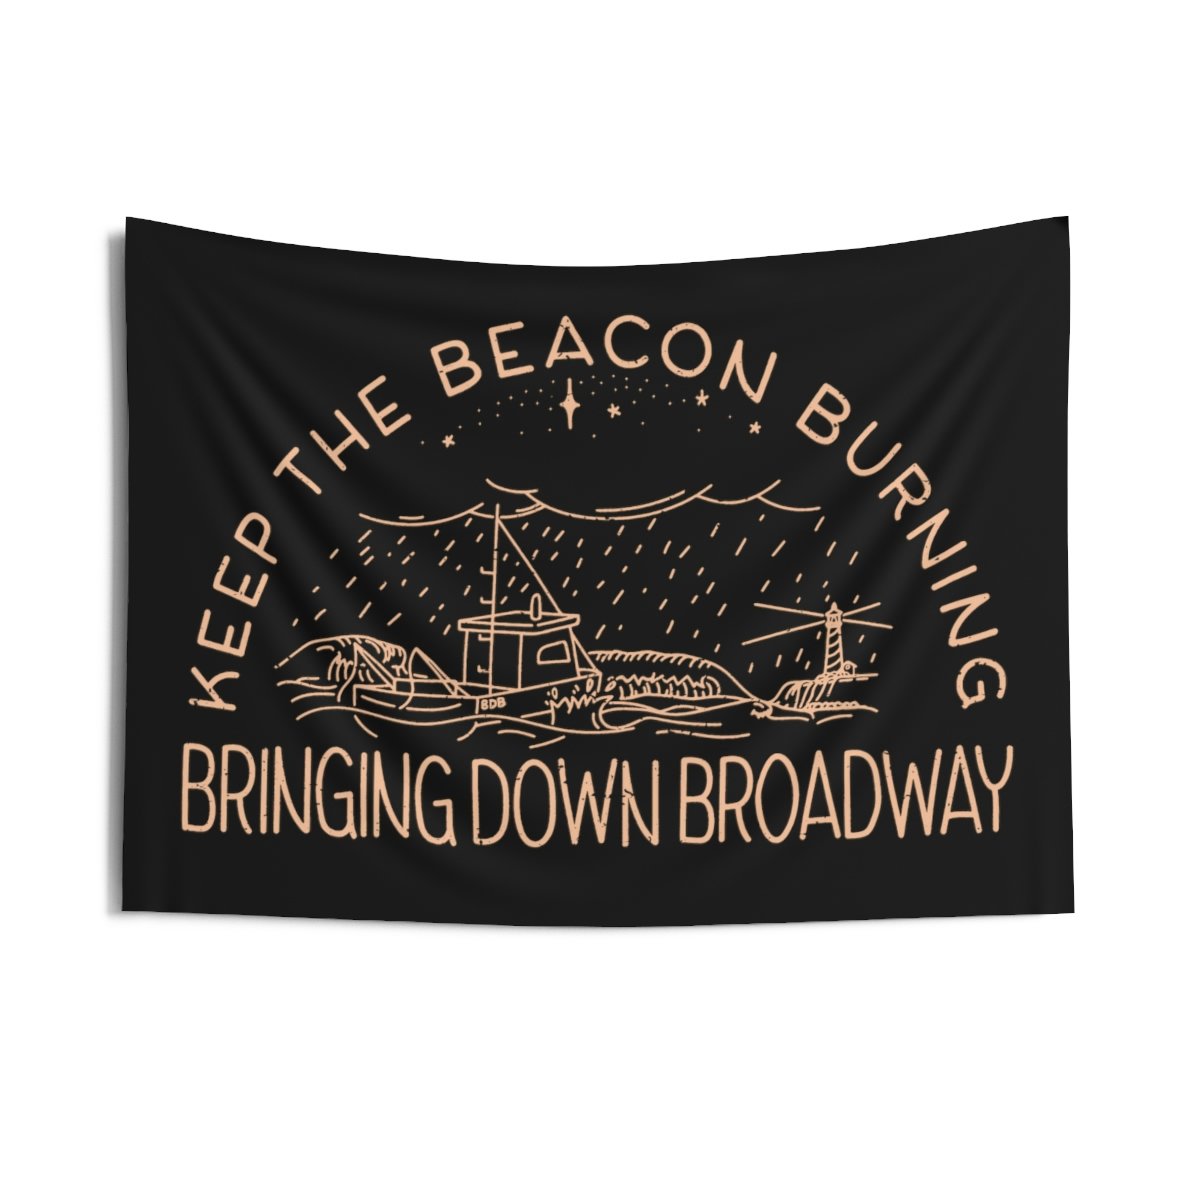 Bringing Down Broadway – Beacon Indoor Wall Tapestries